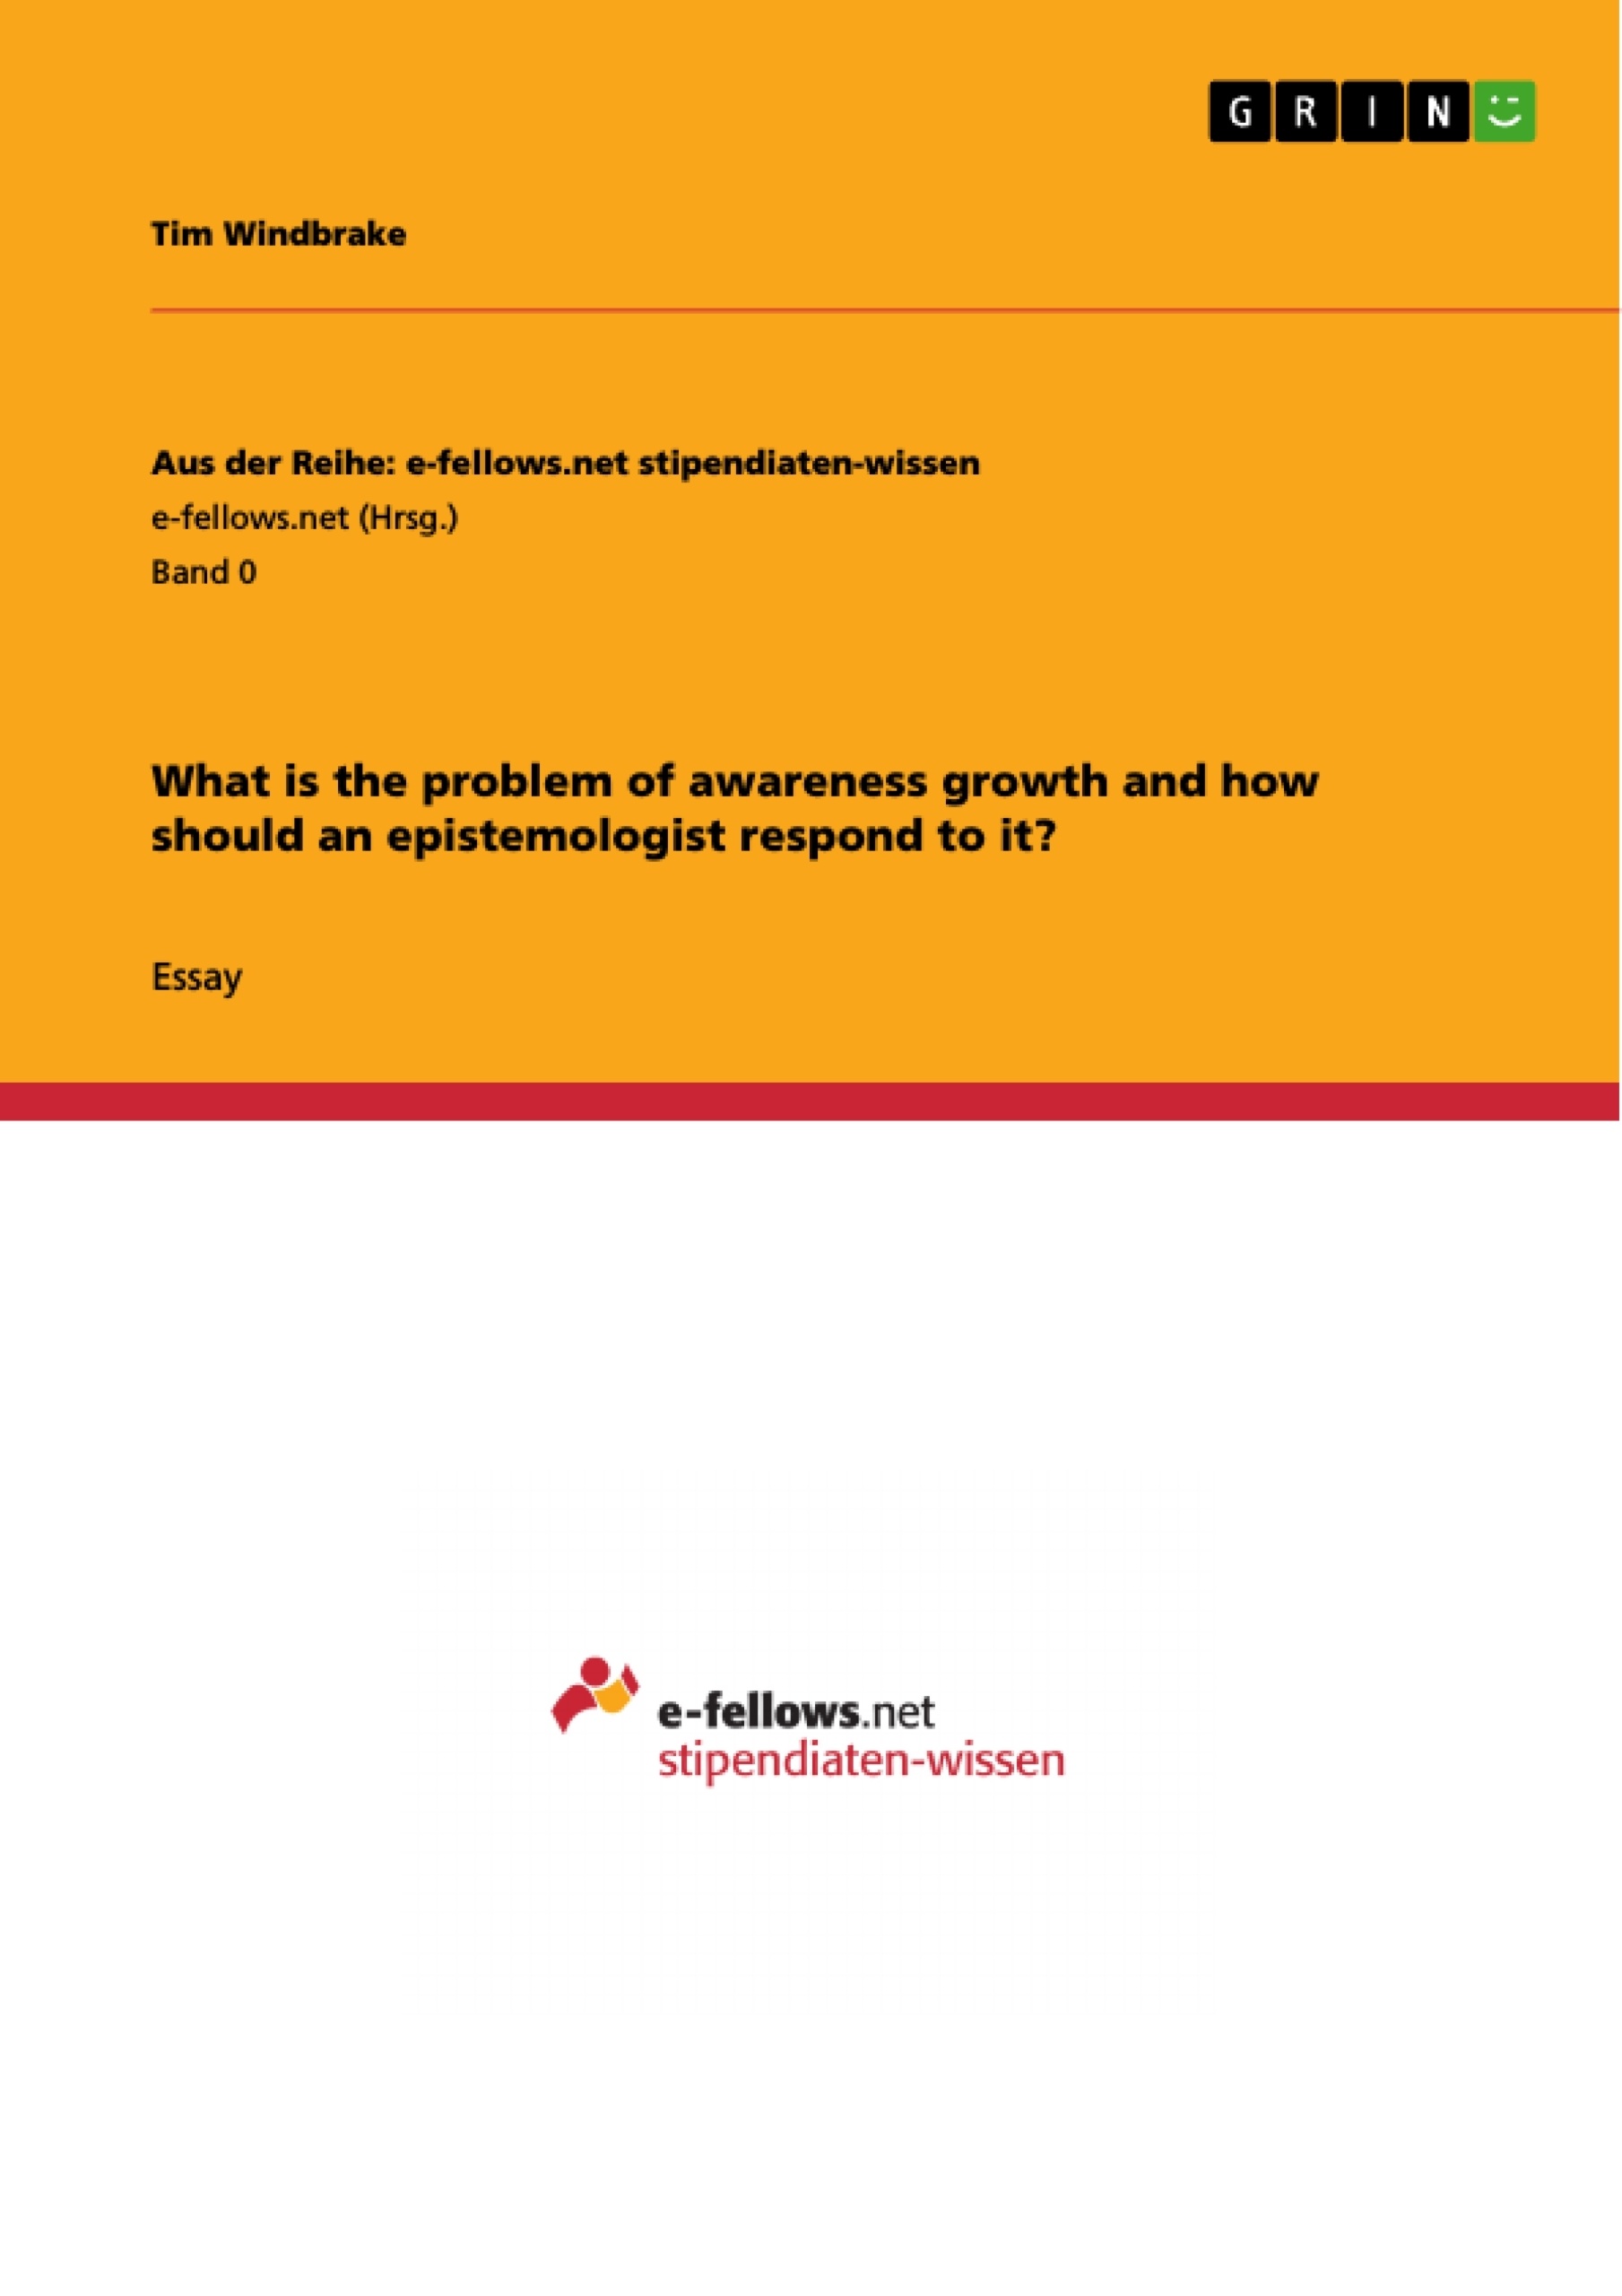 Title: What is the problem of awareness growth and how should an epistemologist respond to it?